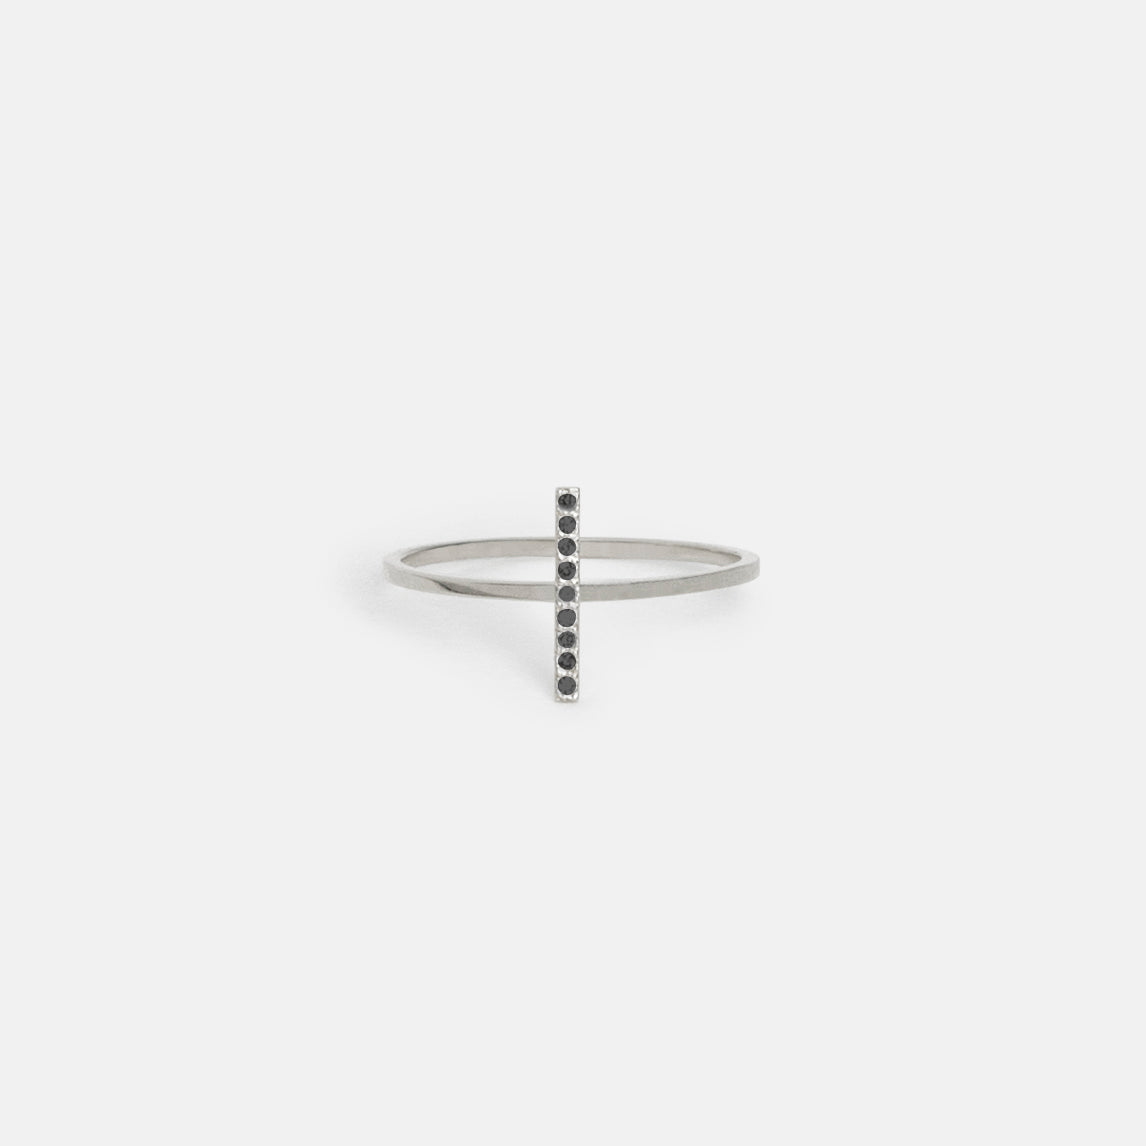 Steva Thin Ring in 14k White Gold set with Black Diamonds by SHW Fine Jewelry